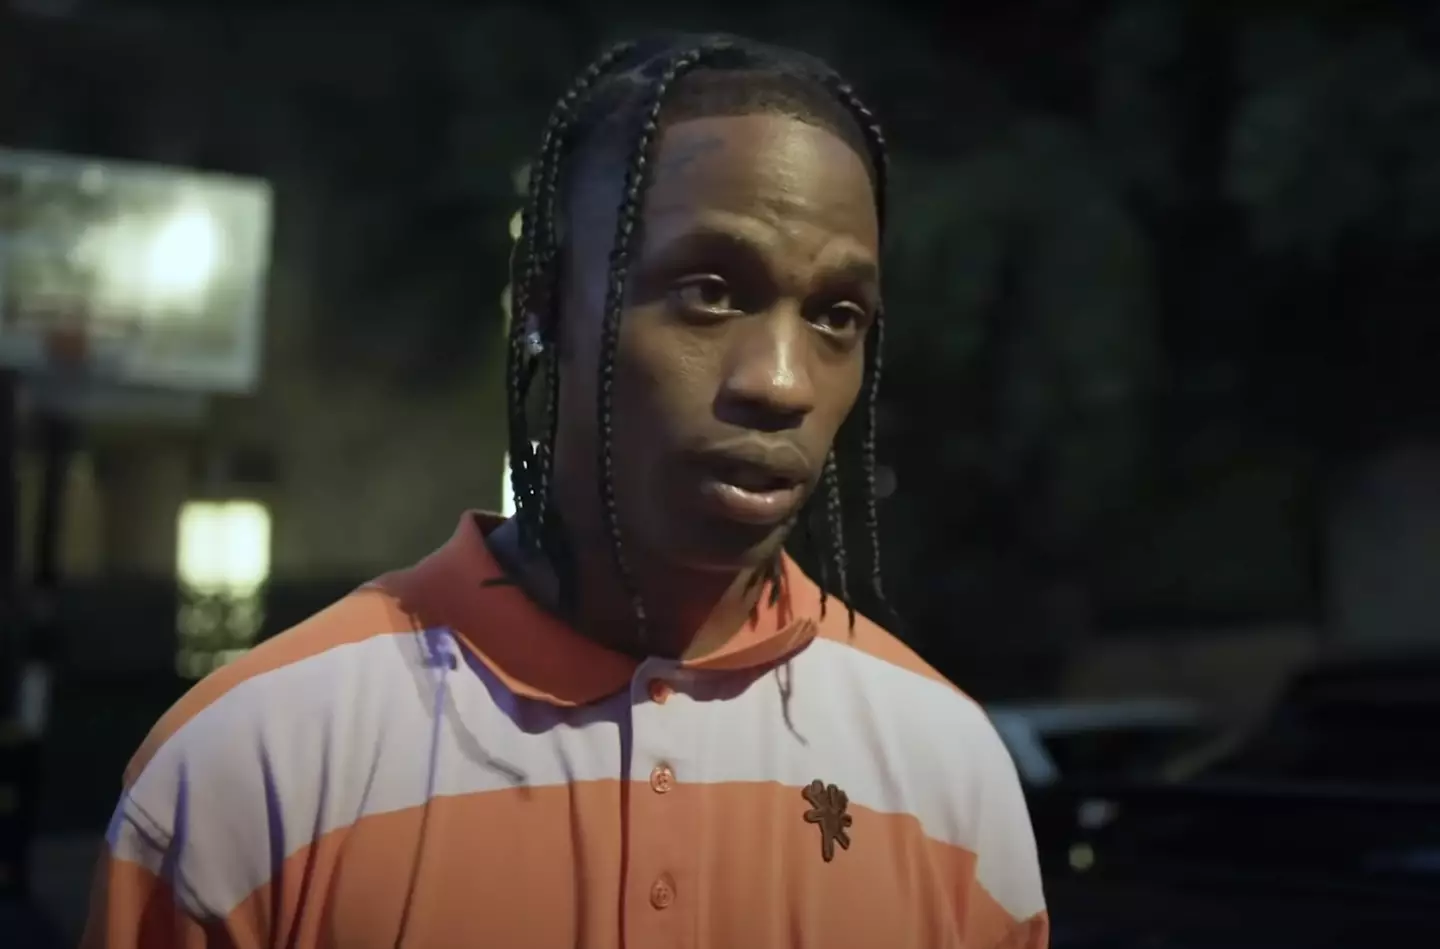 The lawyer of the nine-year-old victim who was killed at the 2021 Astroworld music festival has responded to Travis Scott's claims of police sabotage.